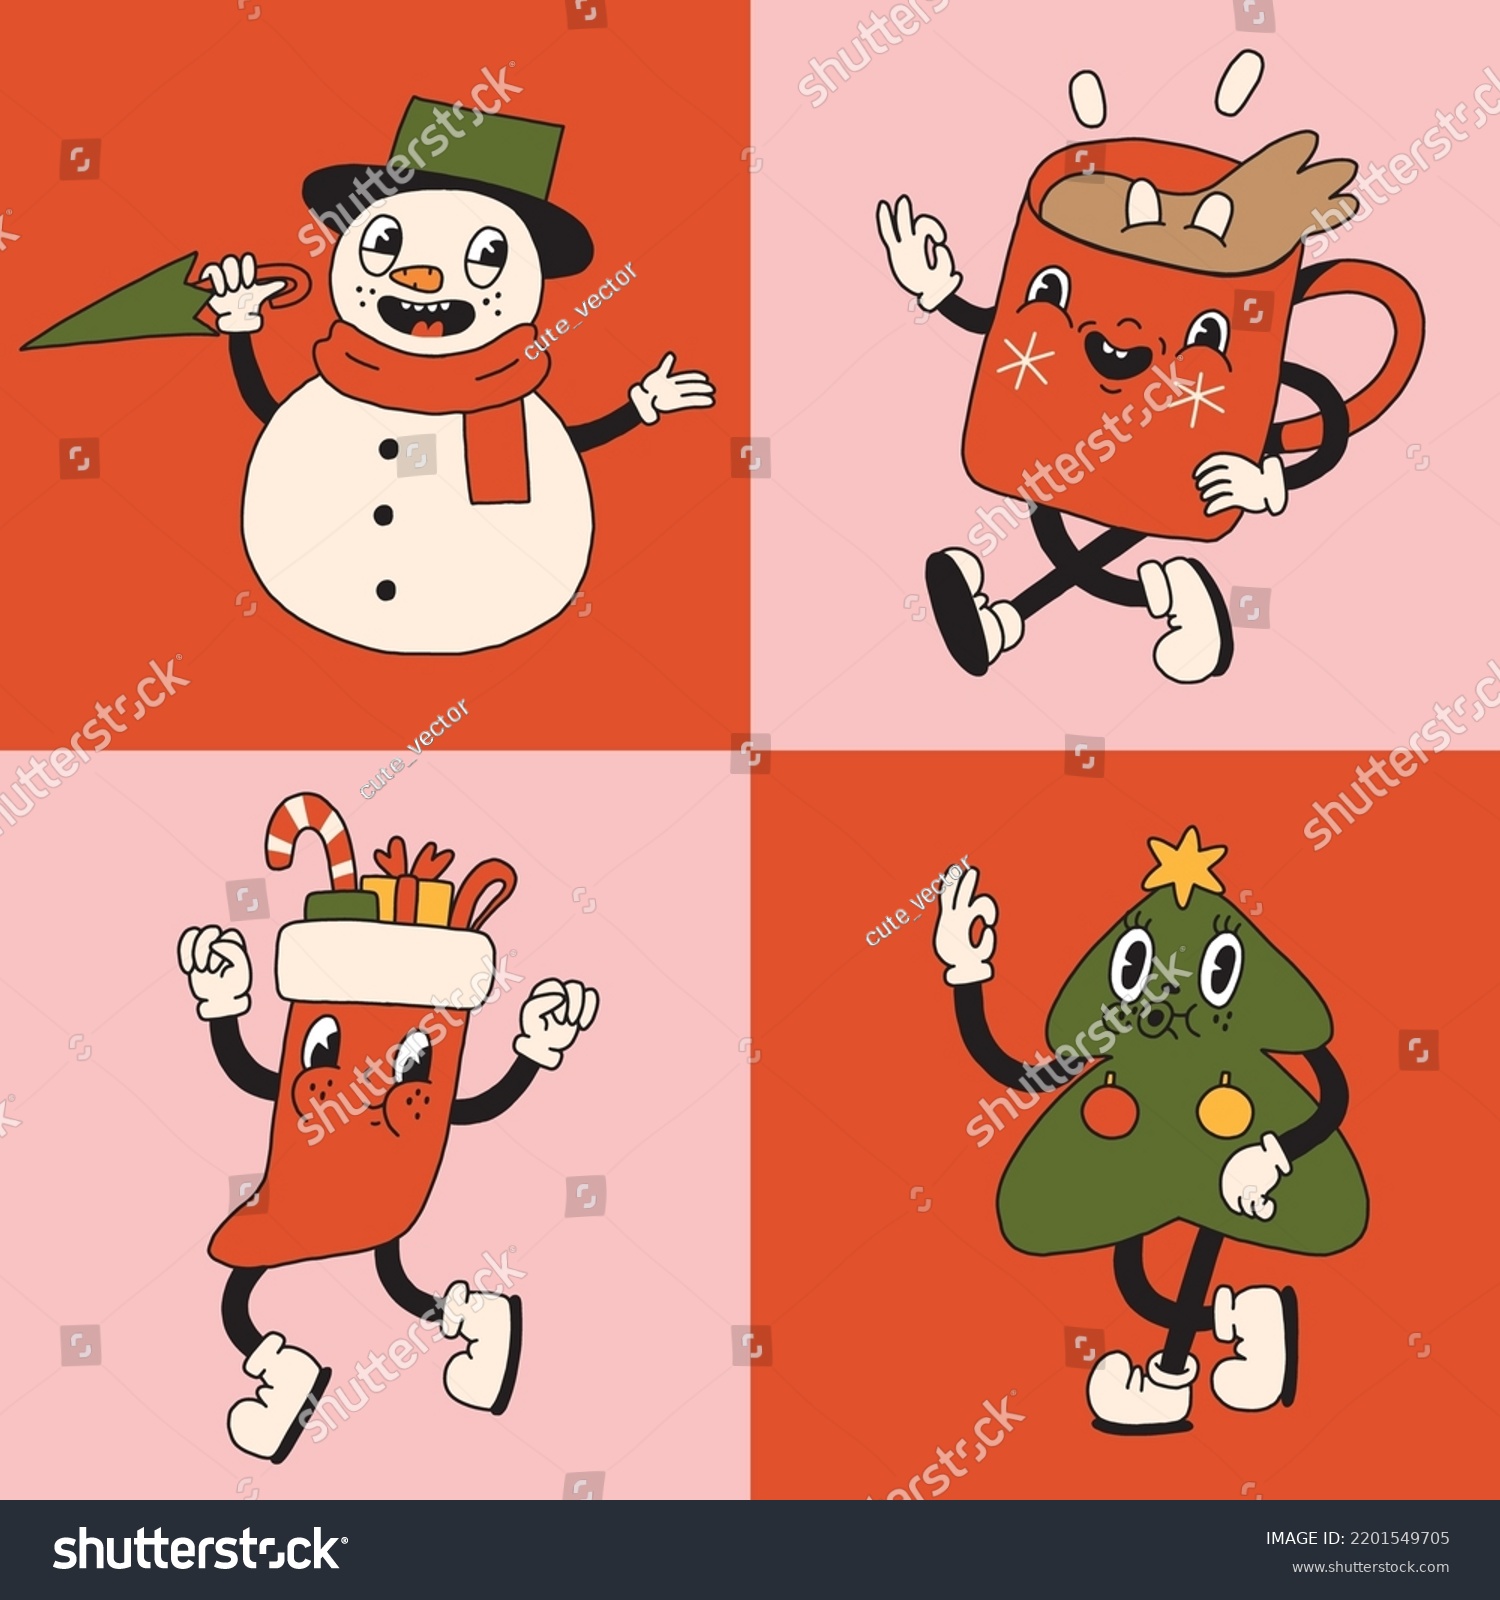 SVG of Christmas retro collection 30s cartoon mascot characters. Snowman, Christmas tree, sock, cup. 50s, 60s old animation style. Vintage comic merry Christmas vector. Cheerful, happy emotions. Isolated svg